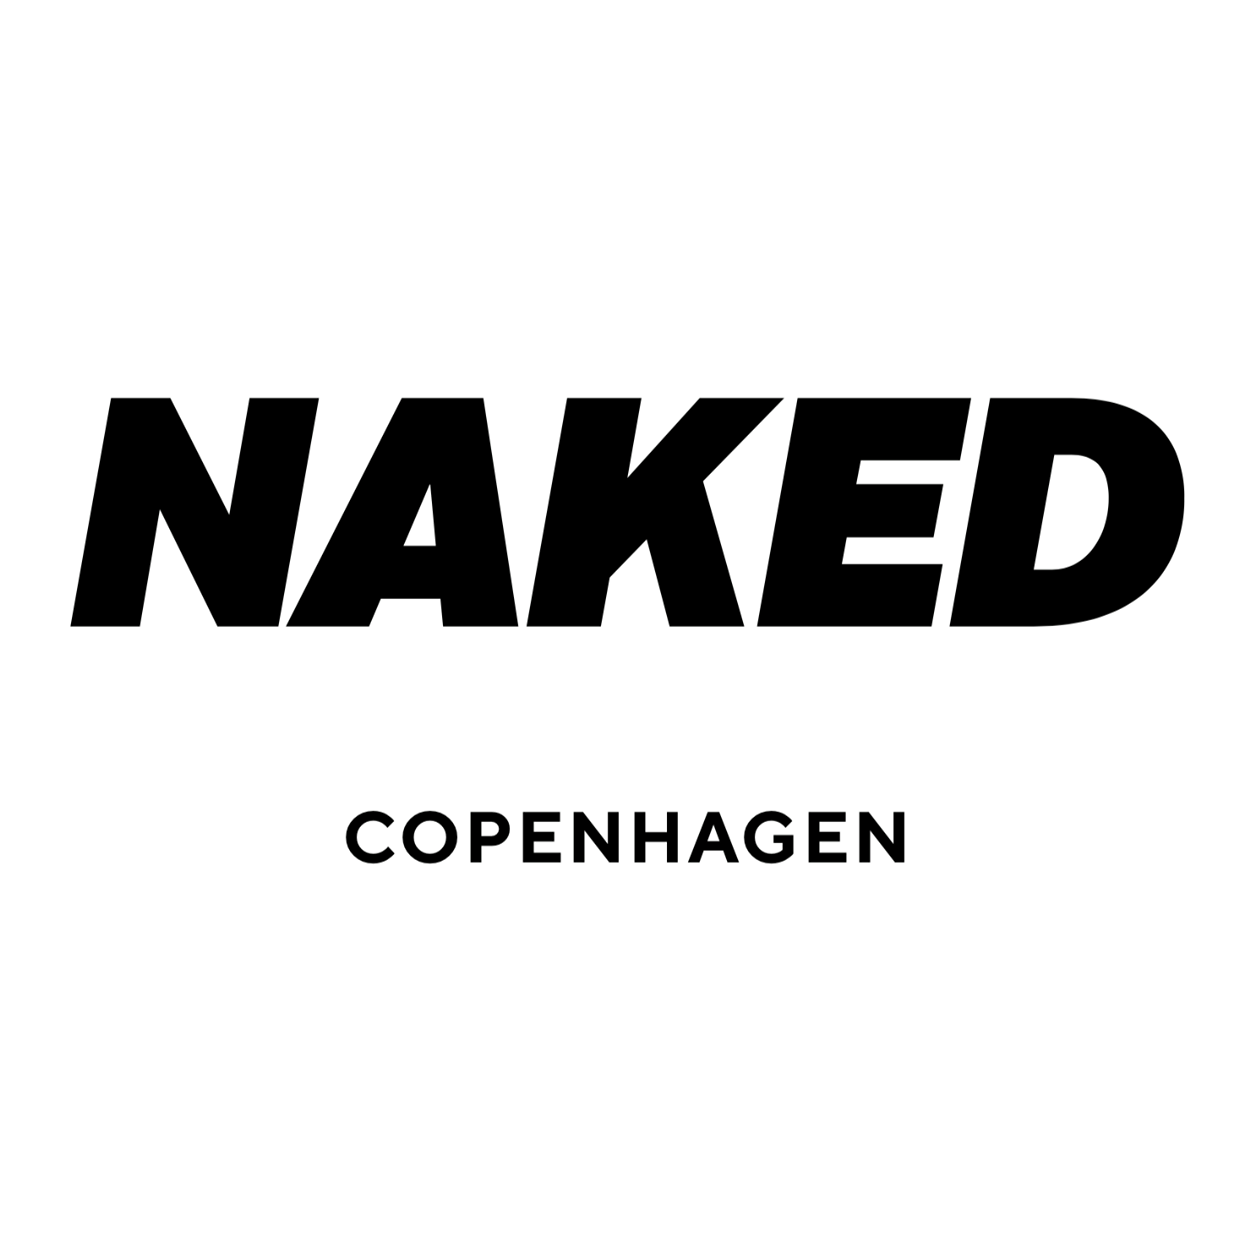 Limited edition shoes NAKED Copenhagen